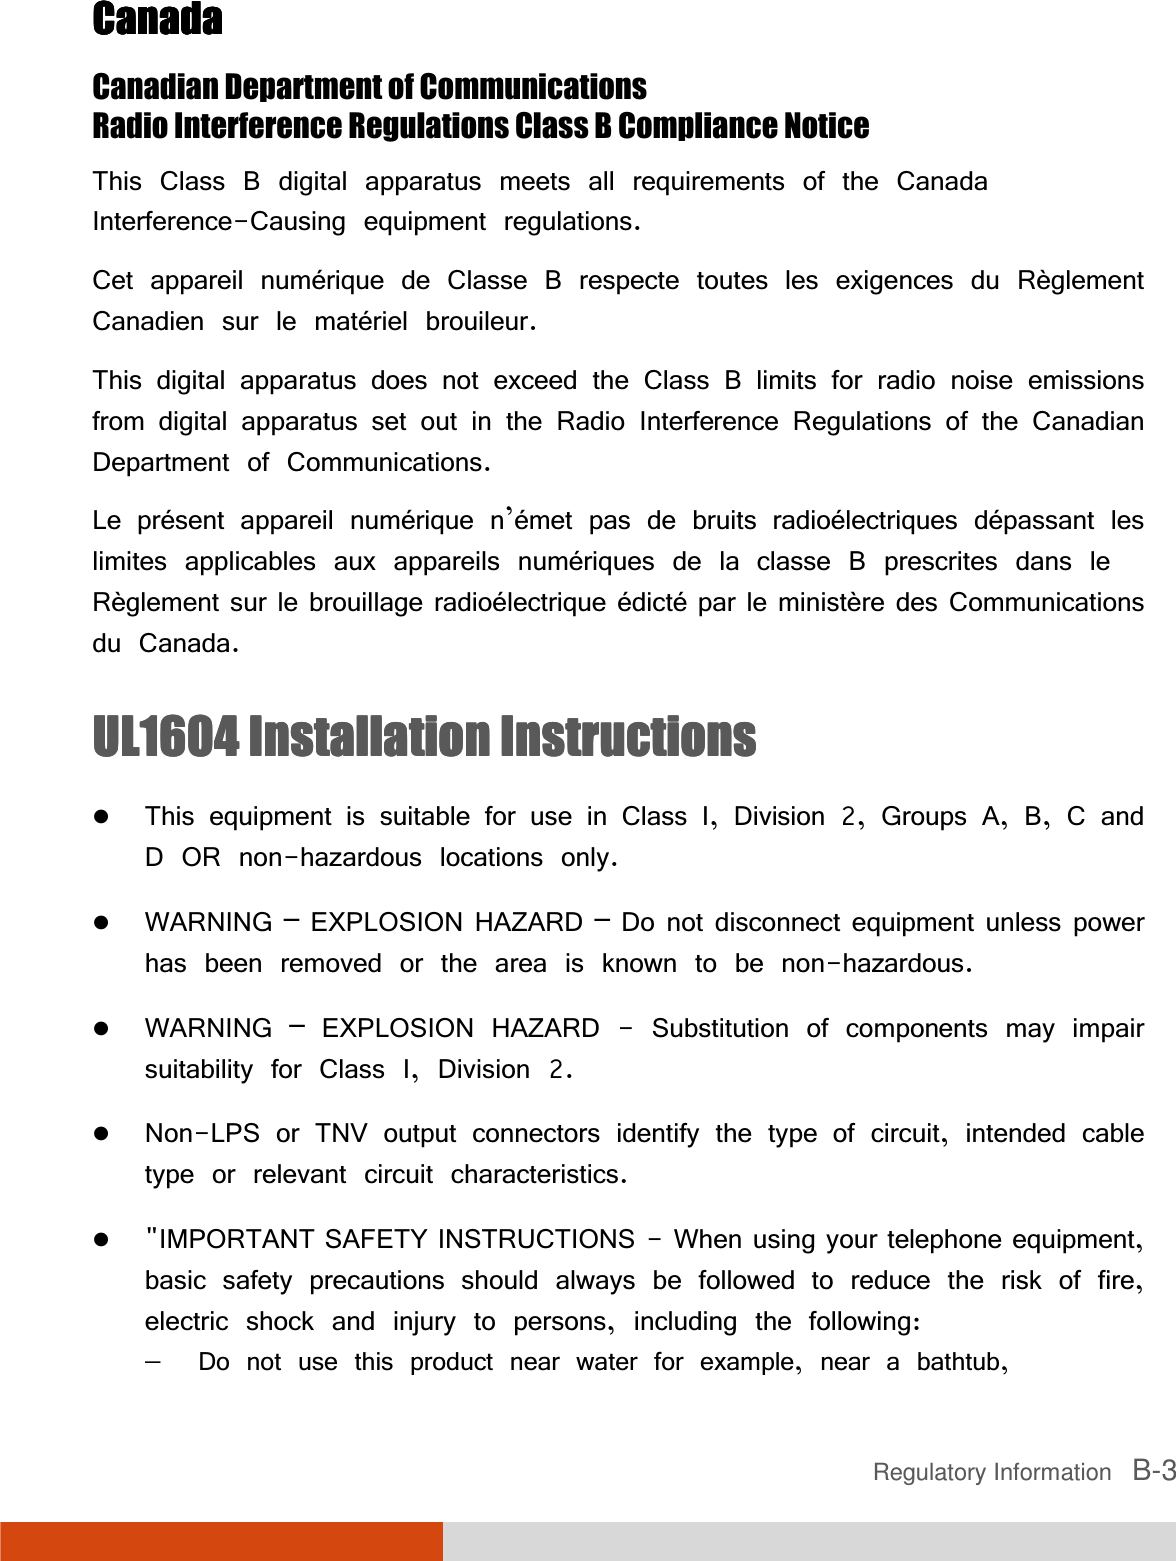 Regulatory Information   B-3CanadaCanadaCanadaCanada    Canadian Department of Communications Radio Interference Regulations Class B Compliance Notice This Class B digital apparatus meets all requirements of the Canada Interference-Causing equipment regulations. Cet appareil numérique de Classe B respecte toutes les exigences du Règlement Canadien sur le matériel brouileur. This digital apparatus does not exceed the Class B limits for radio noise emissions from digital apparatus set out in the Radio Interference Regulations of the Canadian Department of Communications. Le présent appareil numérique n’émet pas de bruits radioélectriques dépassant les limites applicables aux appareils numériques de la classe B prescrites dans le Règlement sur le brouillage radioélectrique édicté par le ministère des Communications du Canada. UL1604UL1604UL1604UL1604    Installation InstructionsInstallation InstructionsInstallation InstructionsInstallation Instructions    This equipment is suitable for use in Class I, Division 2, Groups A, B, C and D OR non-hazardous locations only. WARNING – EXPLOSION HAZARD – Do not disconnect equipment unless power has been removed or the area is known to be non-hazardous. WARNING – EXPLOSION HAZARD - Substitution of components may impair suitability for Class I, Division 2. Non-LPS or TNV output connectors identify the type of circuit, intended cable type or relevant circuit characteristics. &quot;IMPORTANT SAFETY INSTRUCTIONS - When using your telephone equipment, basic safety precautions should always be followed to reduce the risk of fire, electric shock and injury to persons, including the following: −  Do not use this product near water for example, near a bathtub,  